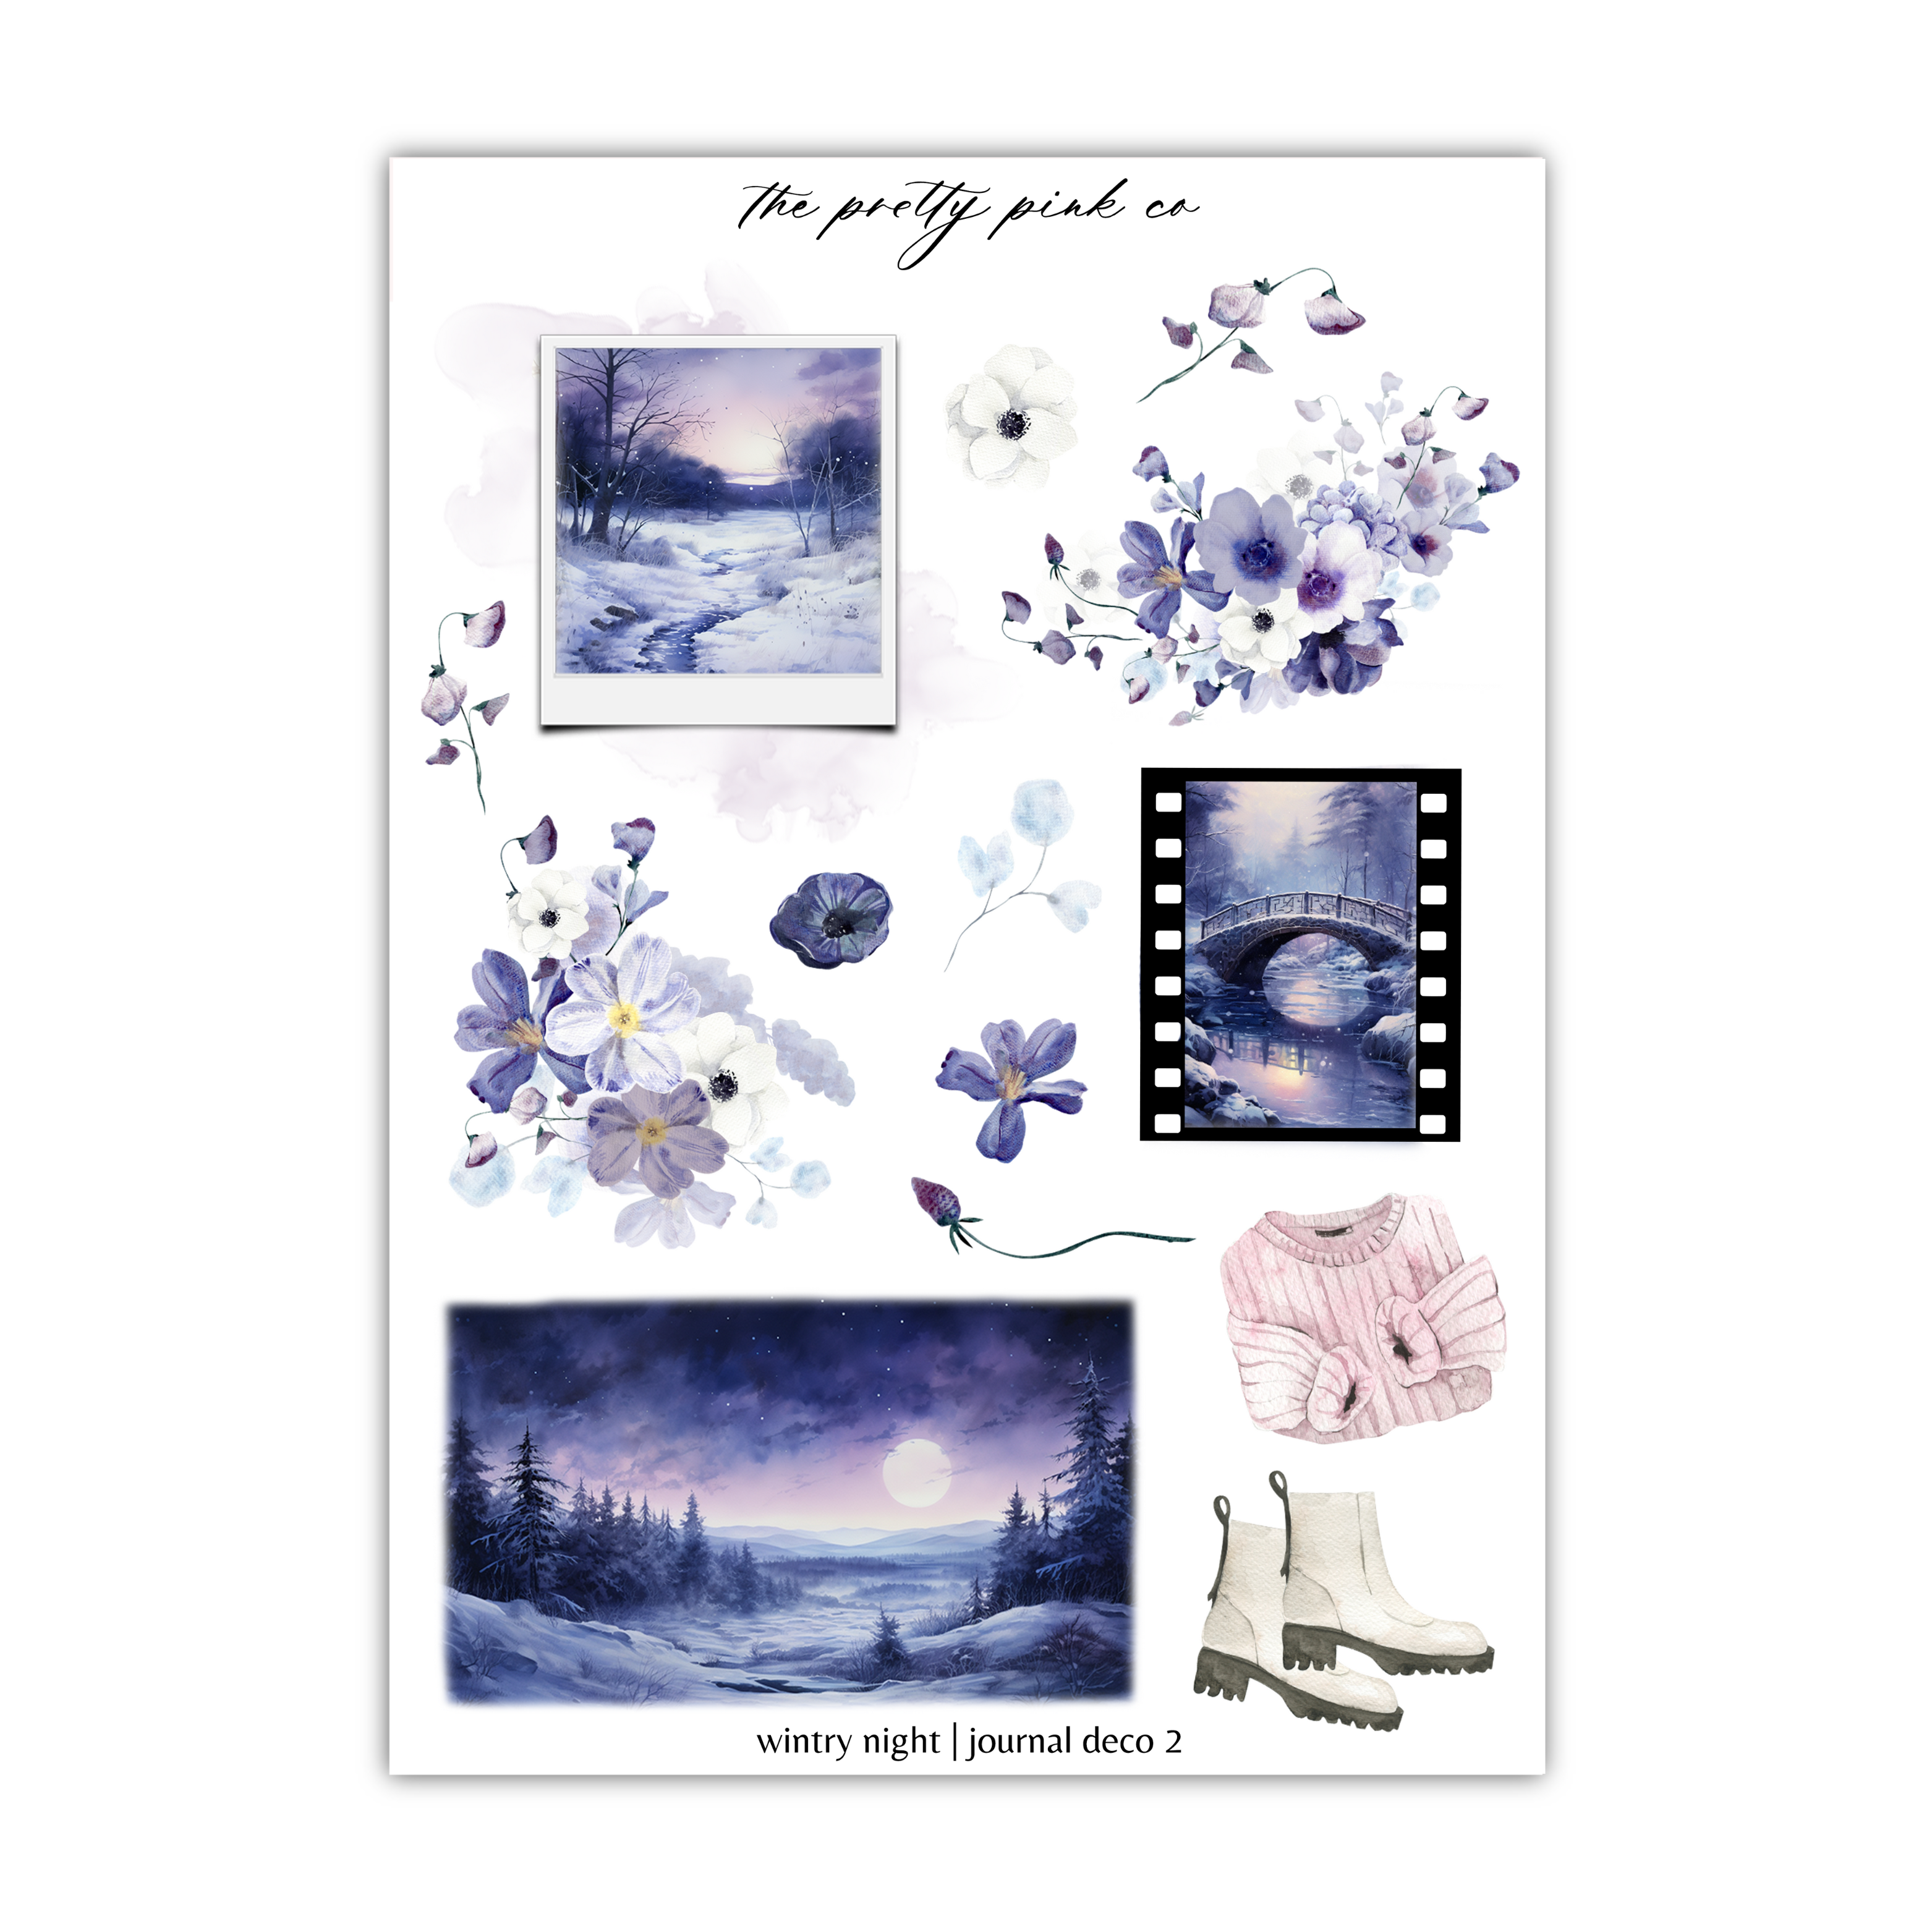 a picture of a winter scene with flowers and pictures